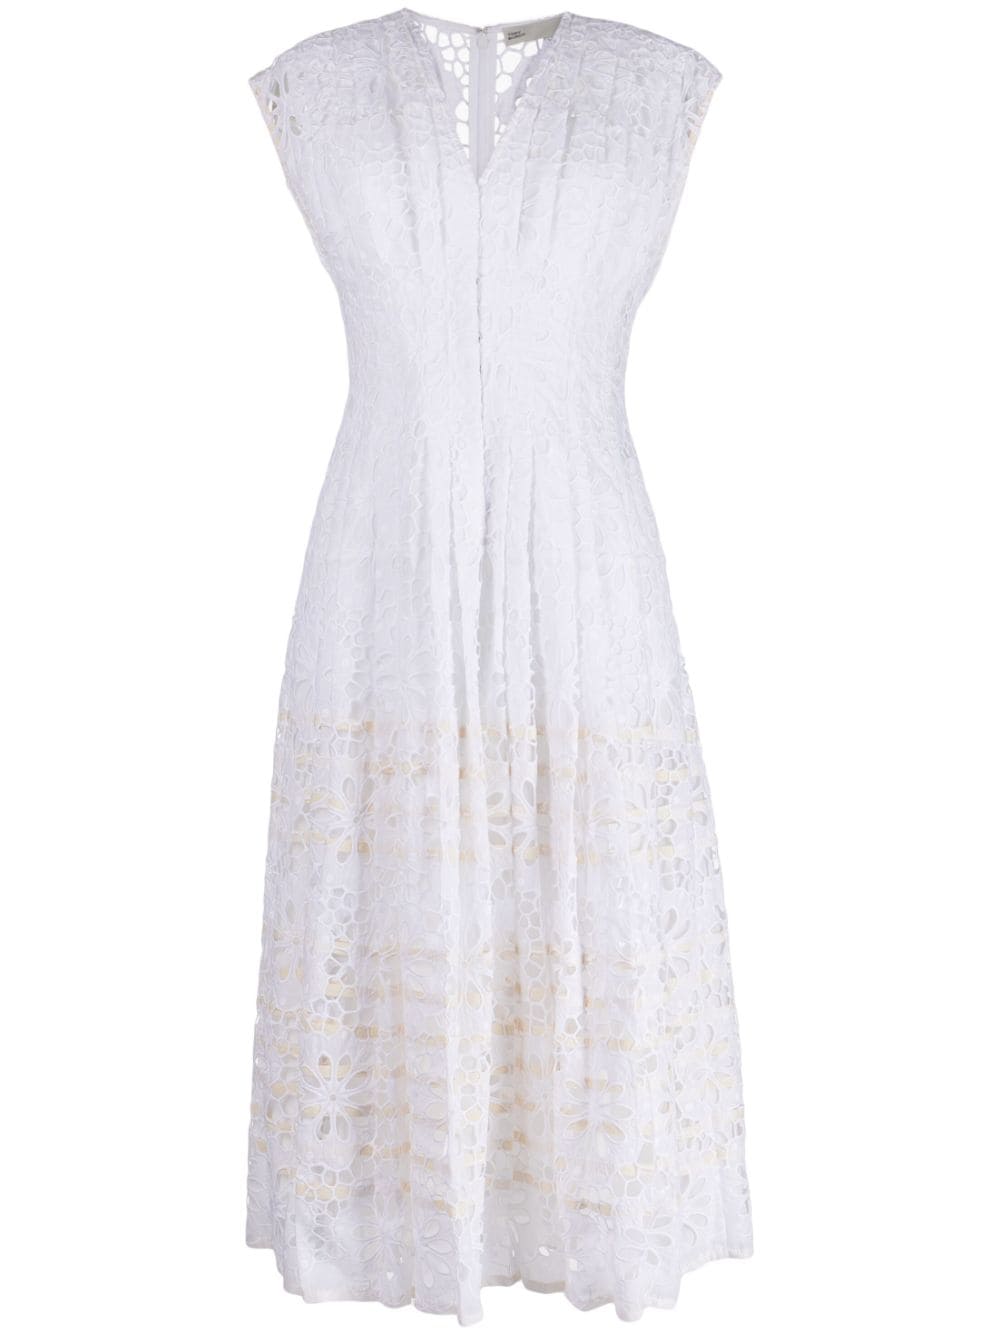 TORY BURCH CLAIRE MCCARDELL BRODERIE ANGLAISE DRESS